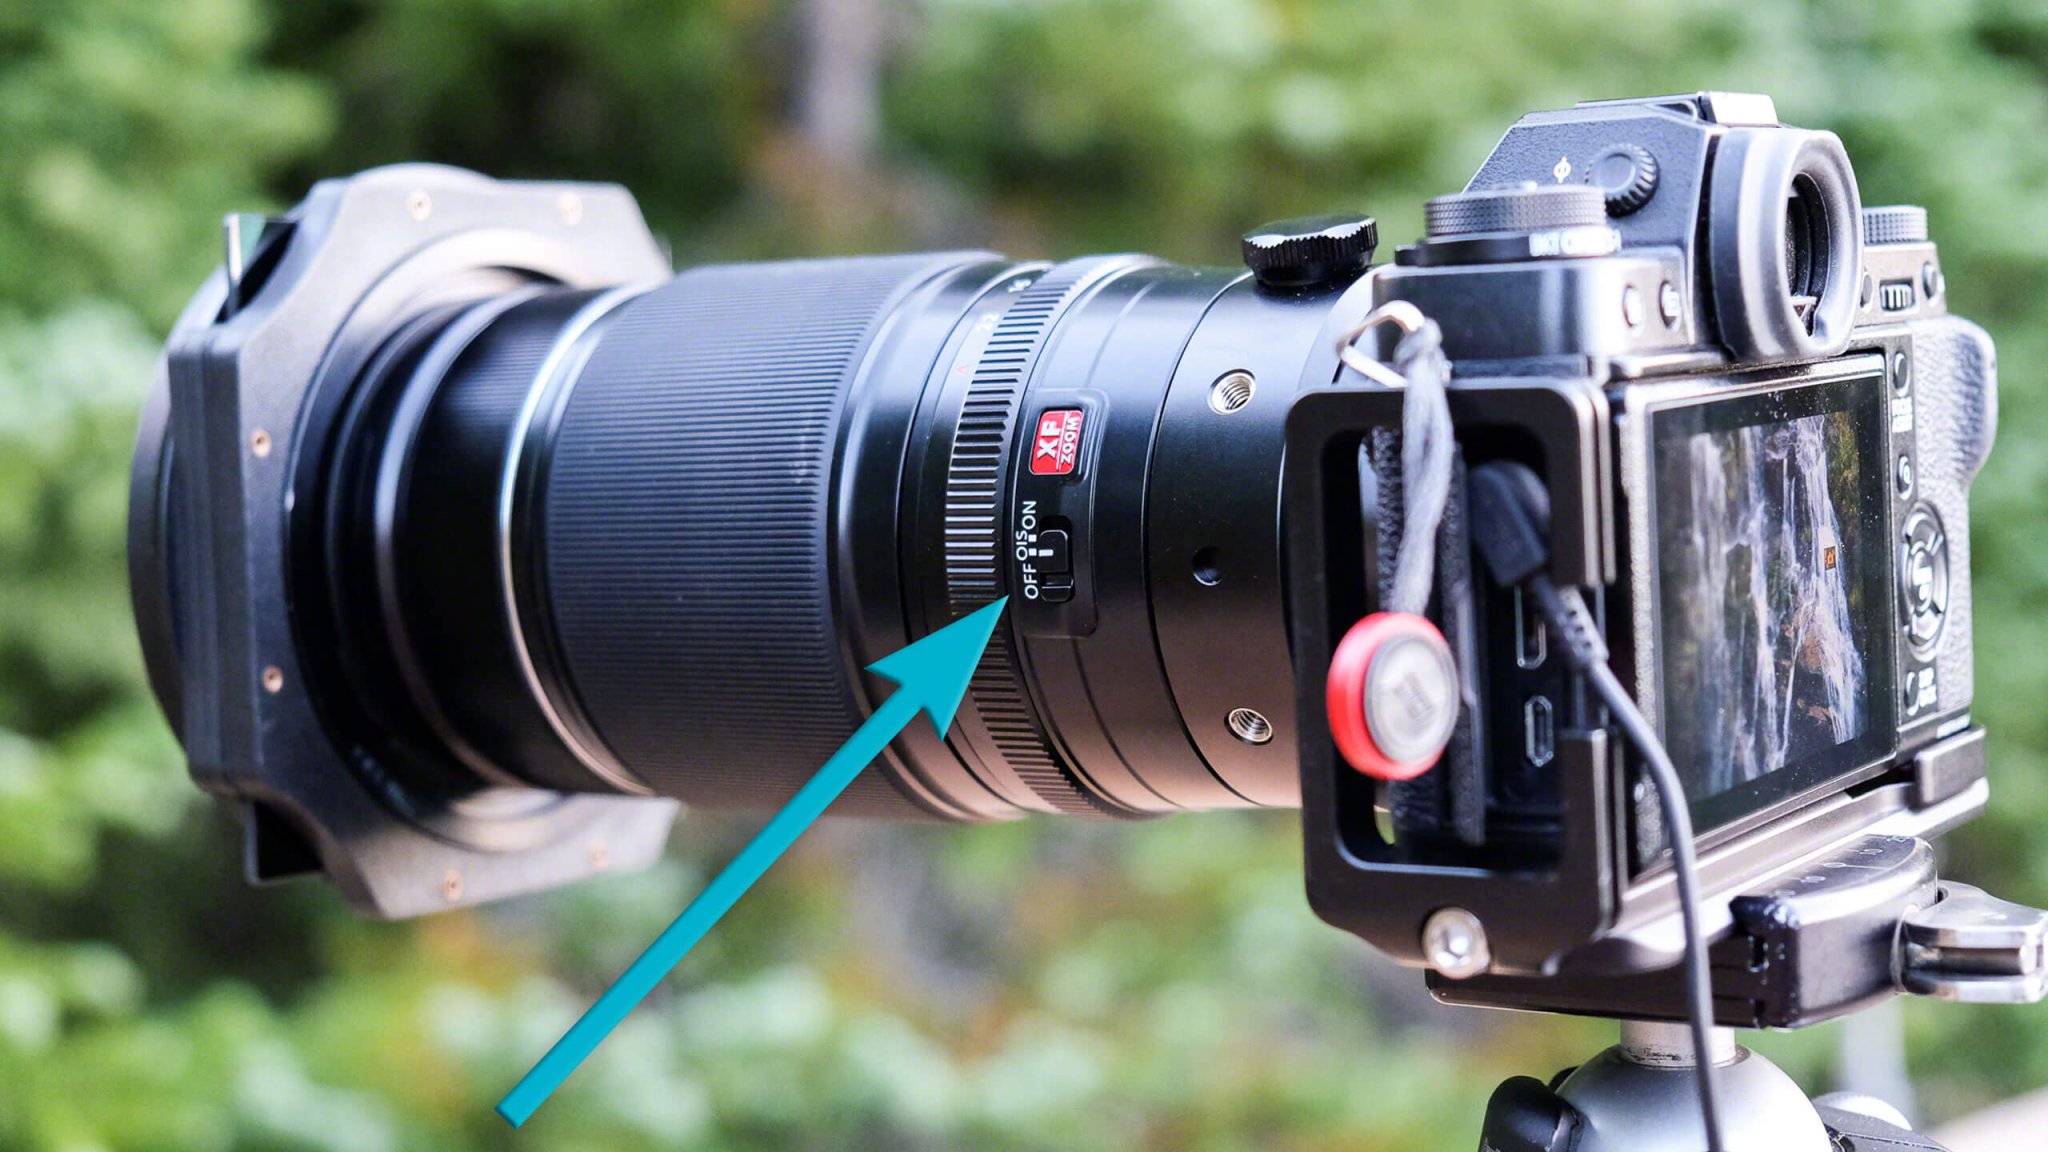 Stabilization: Turn this off when using a tripod